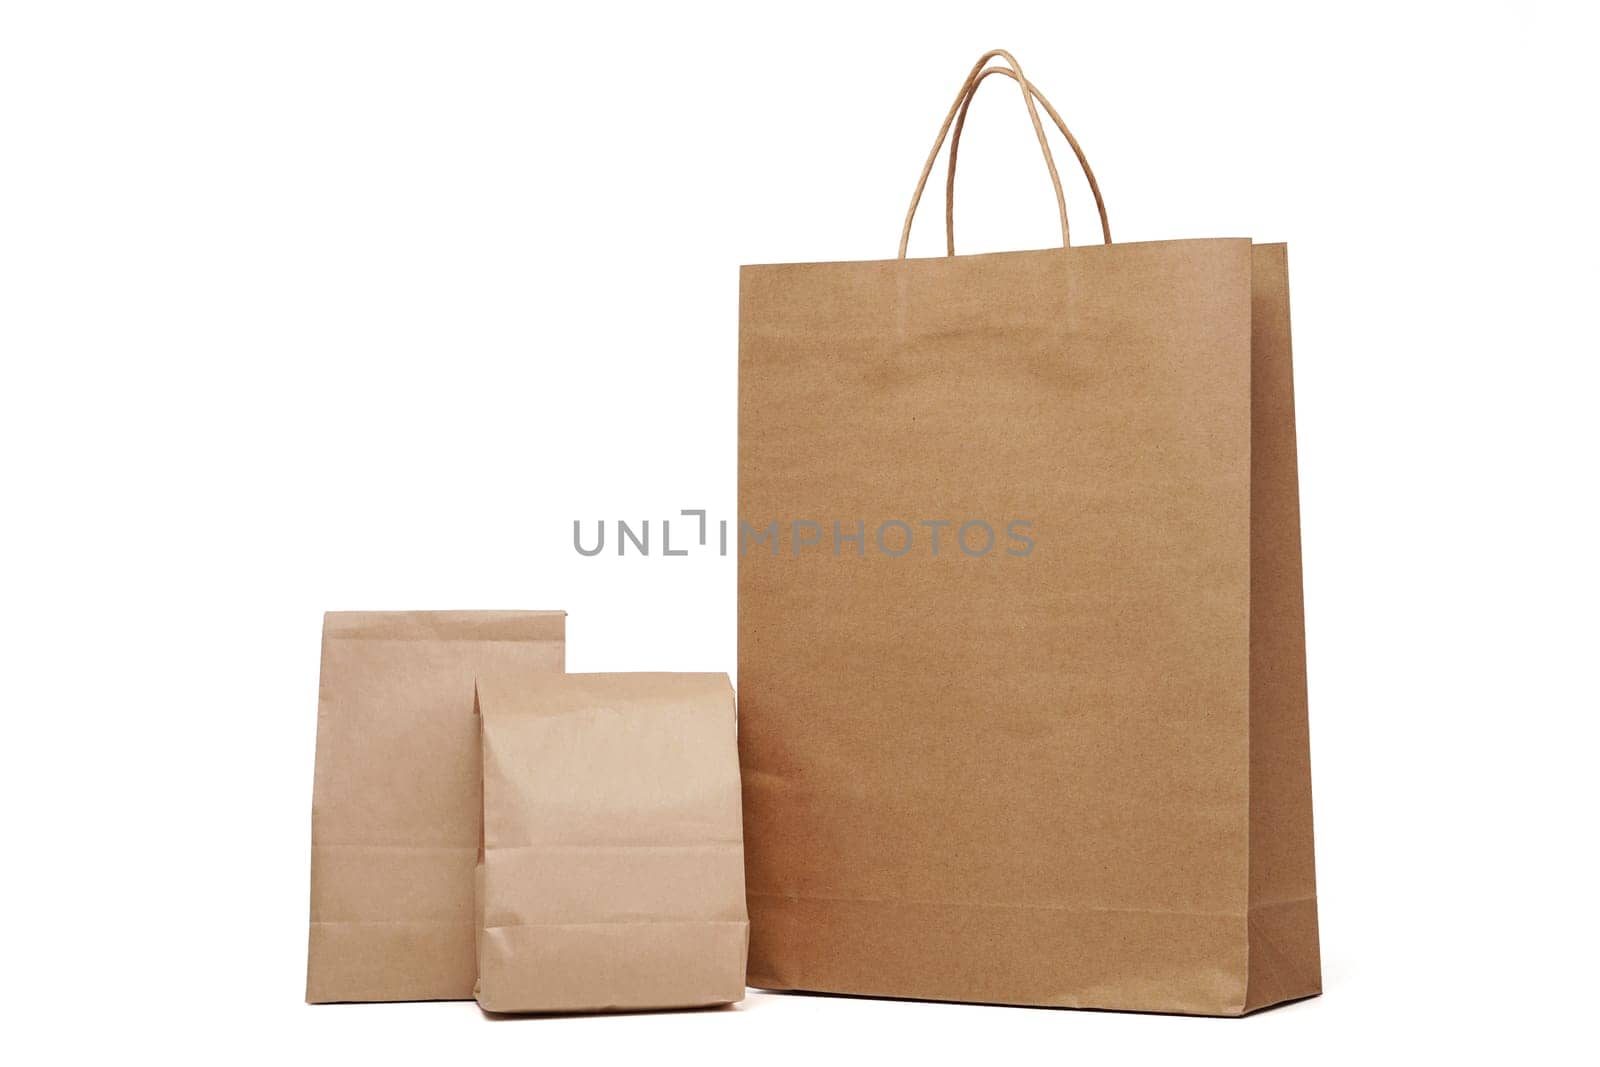 Group of lunch Paper bag and shopping paper bags isolated on a white background by PattyPhoto